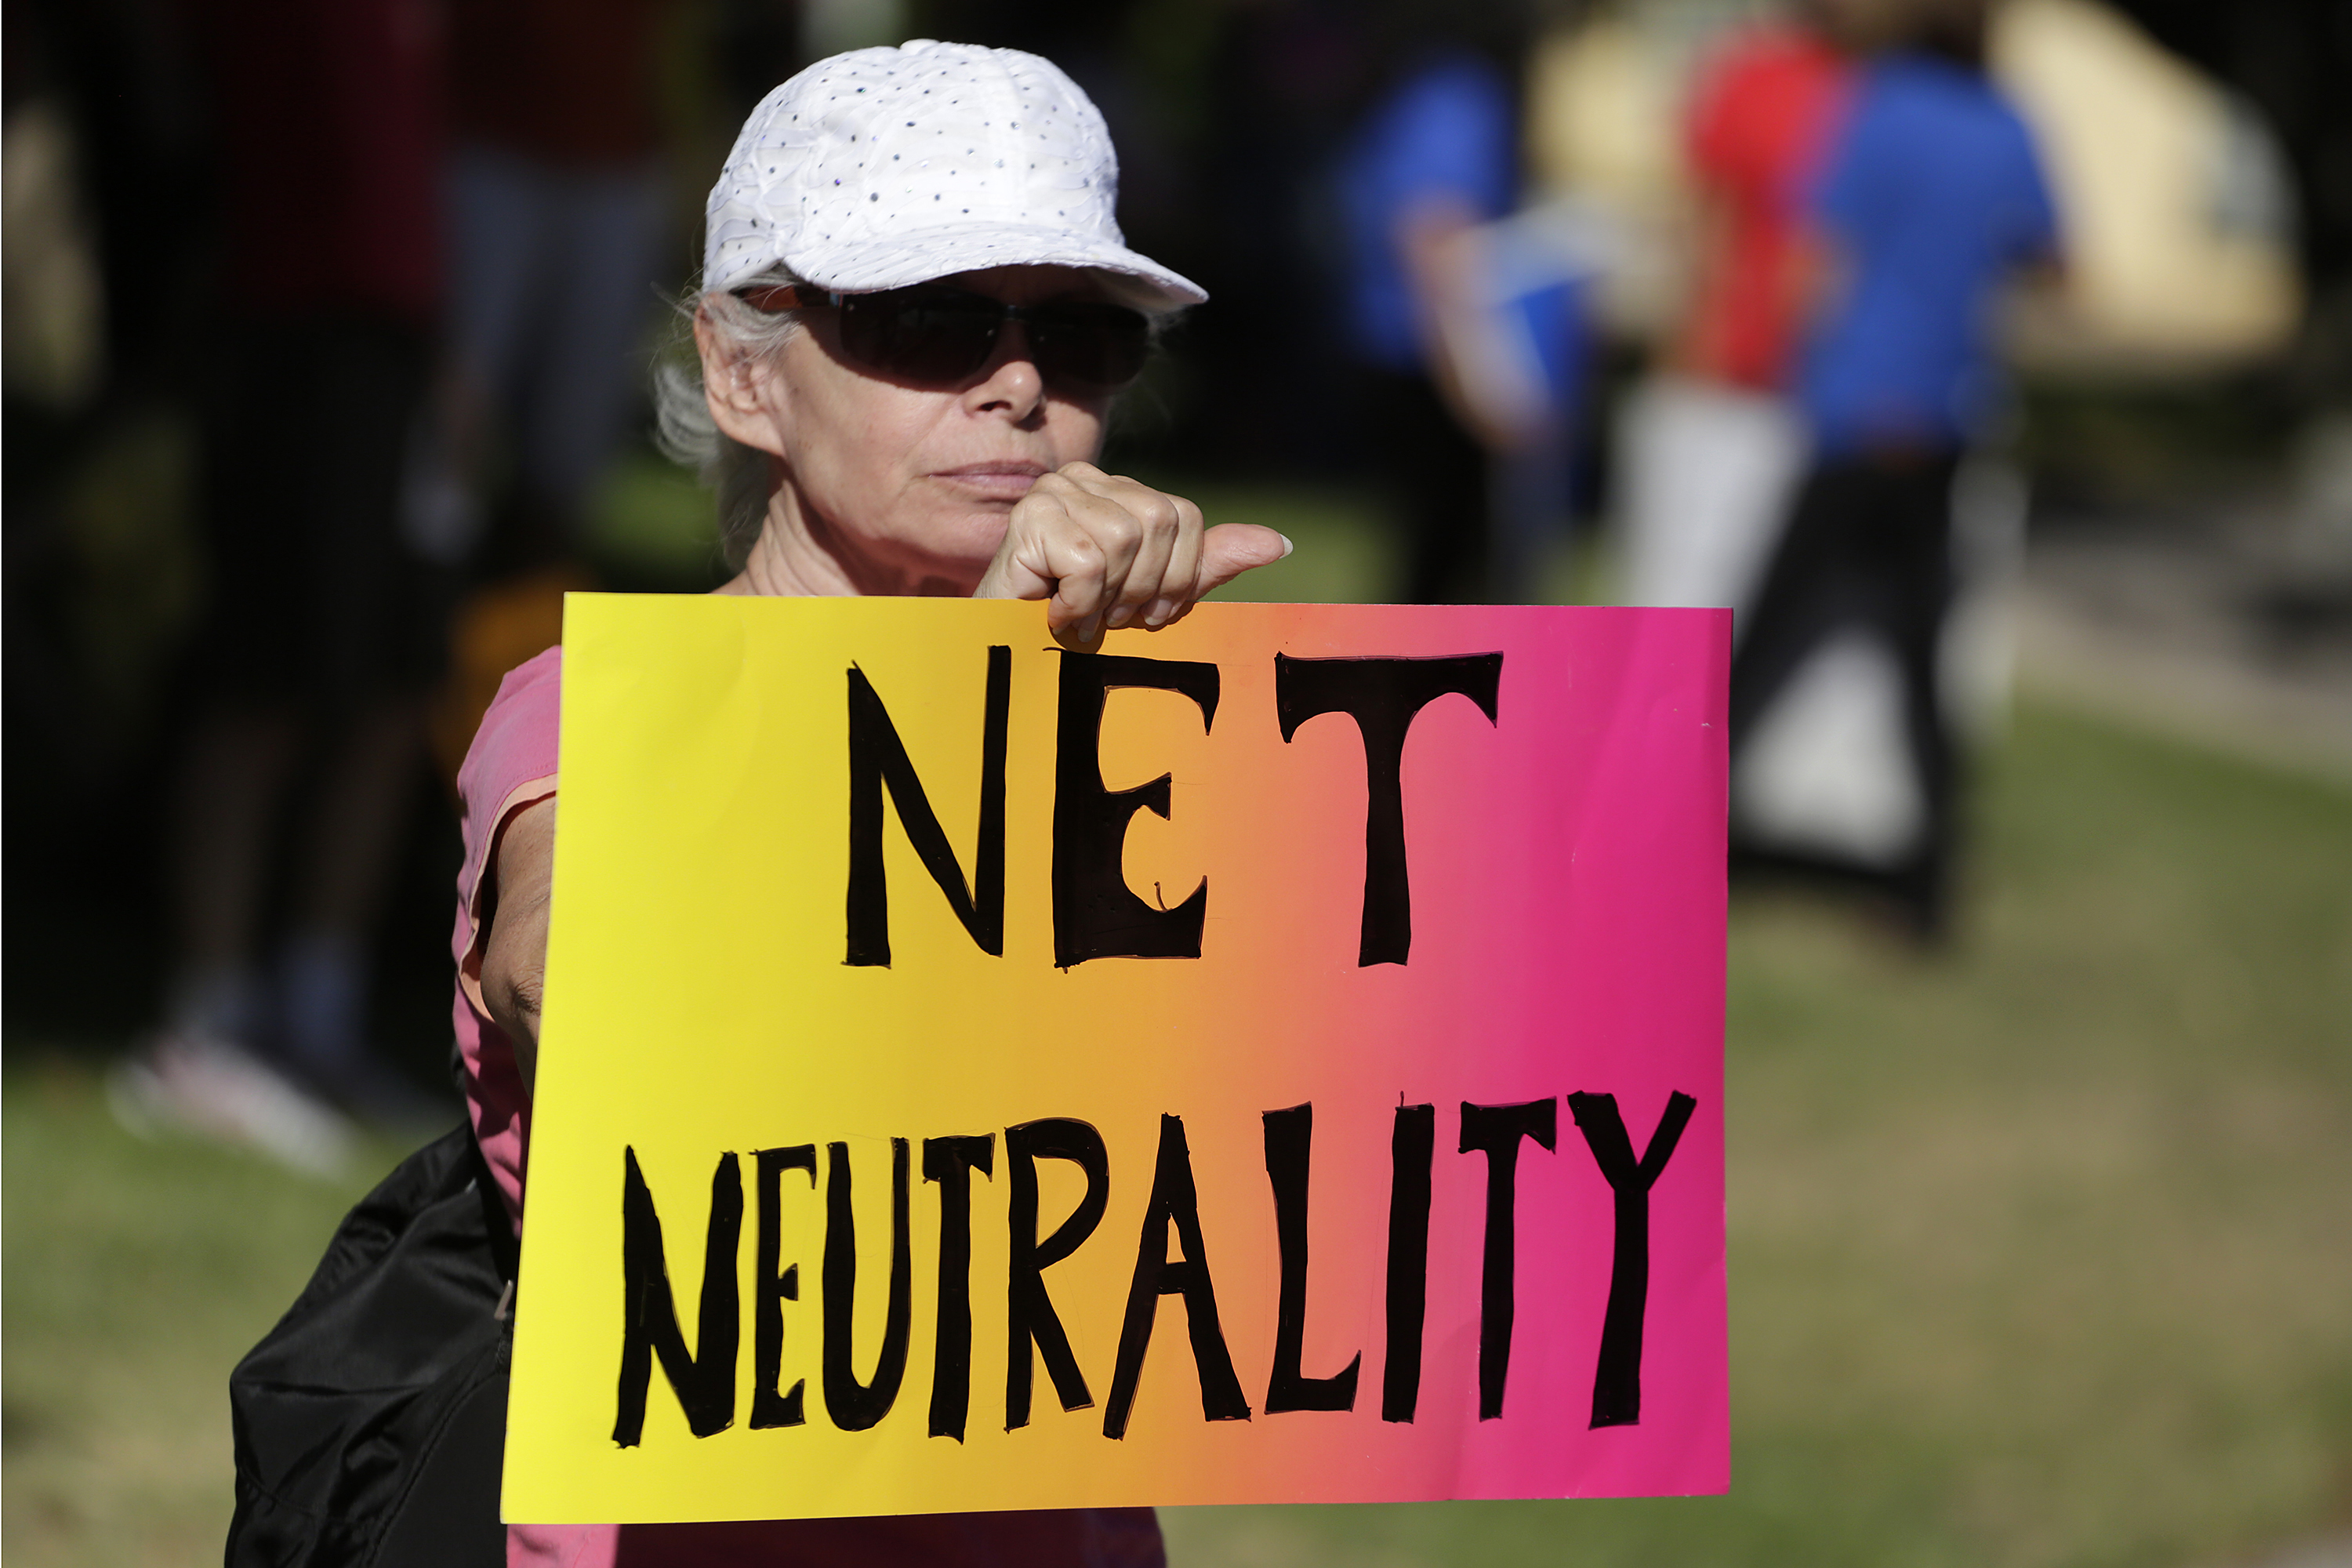 Erlendsson attends a pro-net neutrality Internet activist rally in the neighborhood where U.S. President Barack Obama attended a fundraiser in Los Angeles